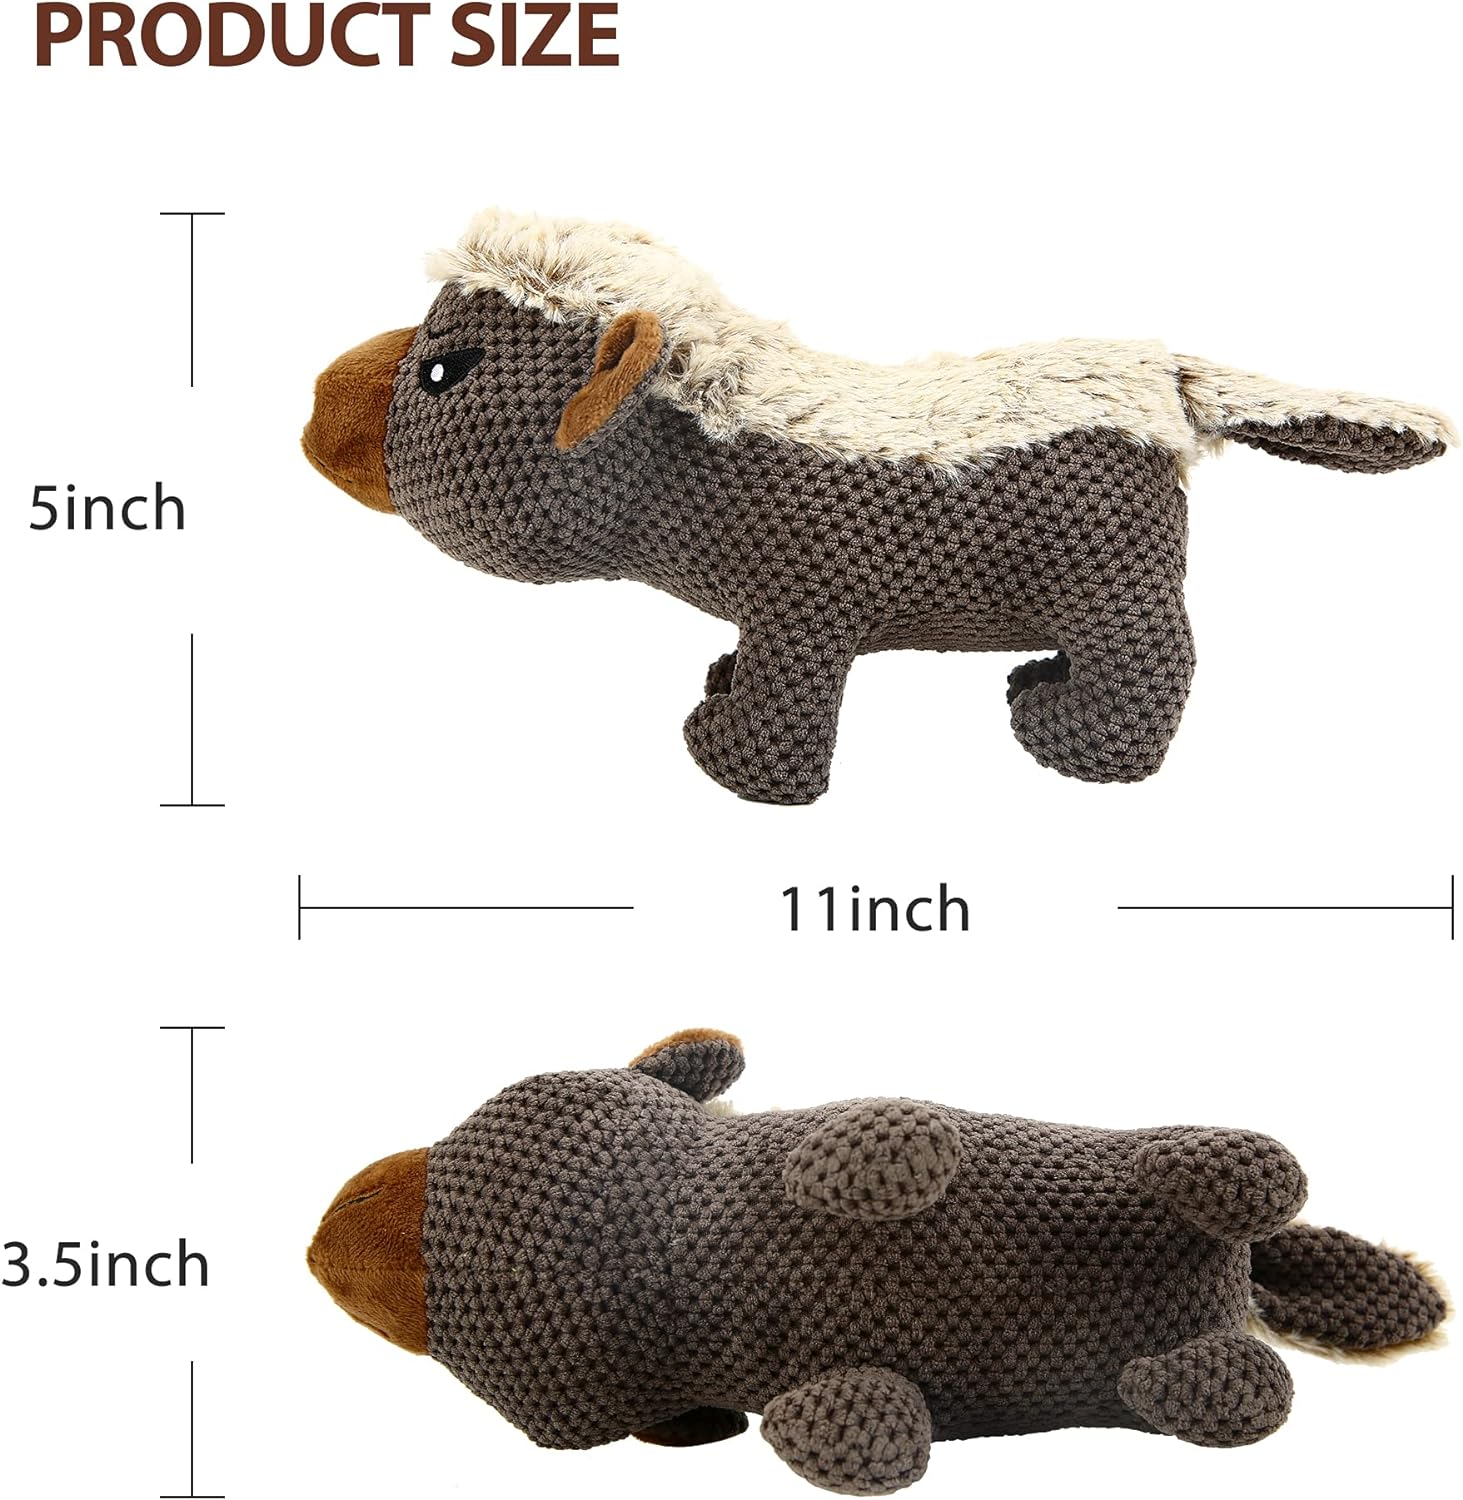 IOKHEIRA Dog Plush Toys for Aggressive Chewers, Indestructible Dog Squeaky Toys with Crinkle Paper, Durable Teething Chew Toys for Medium and Large Breed (Coffee Brown, Honey Badger)